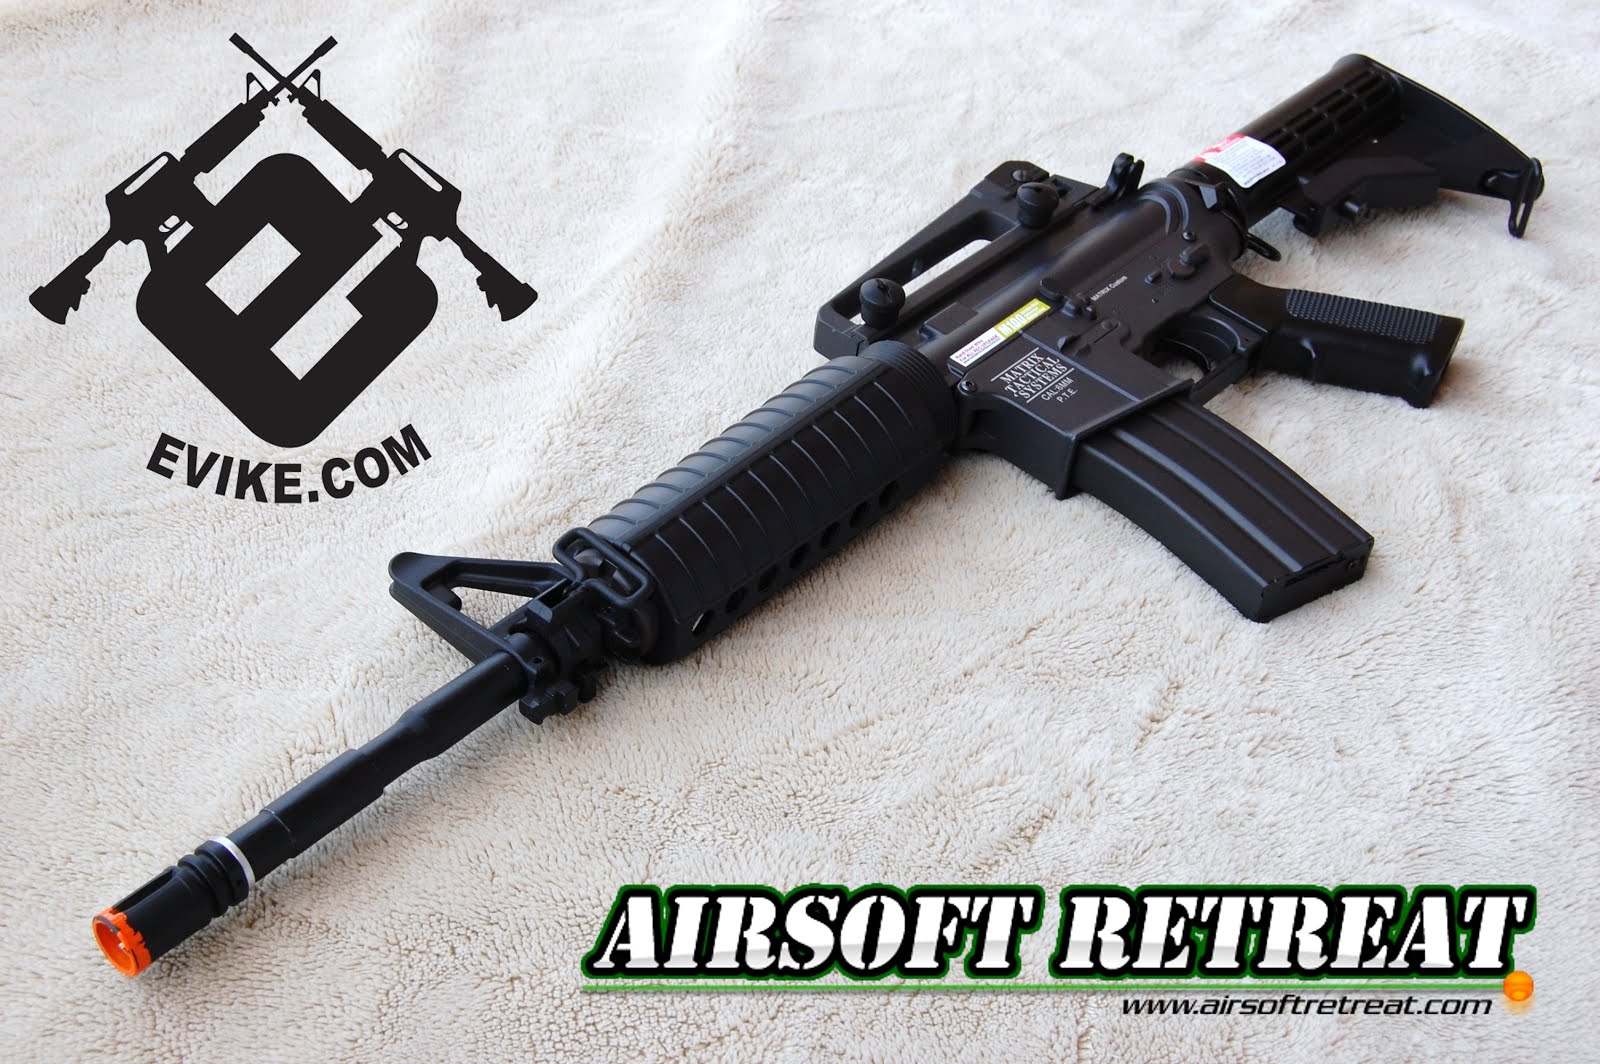 Airsoft: History, Types, Objective, & Equipment - Sportsmatik